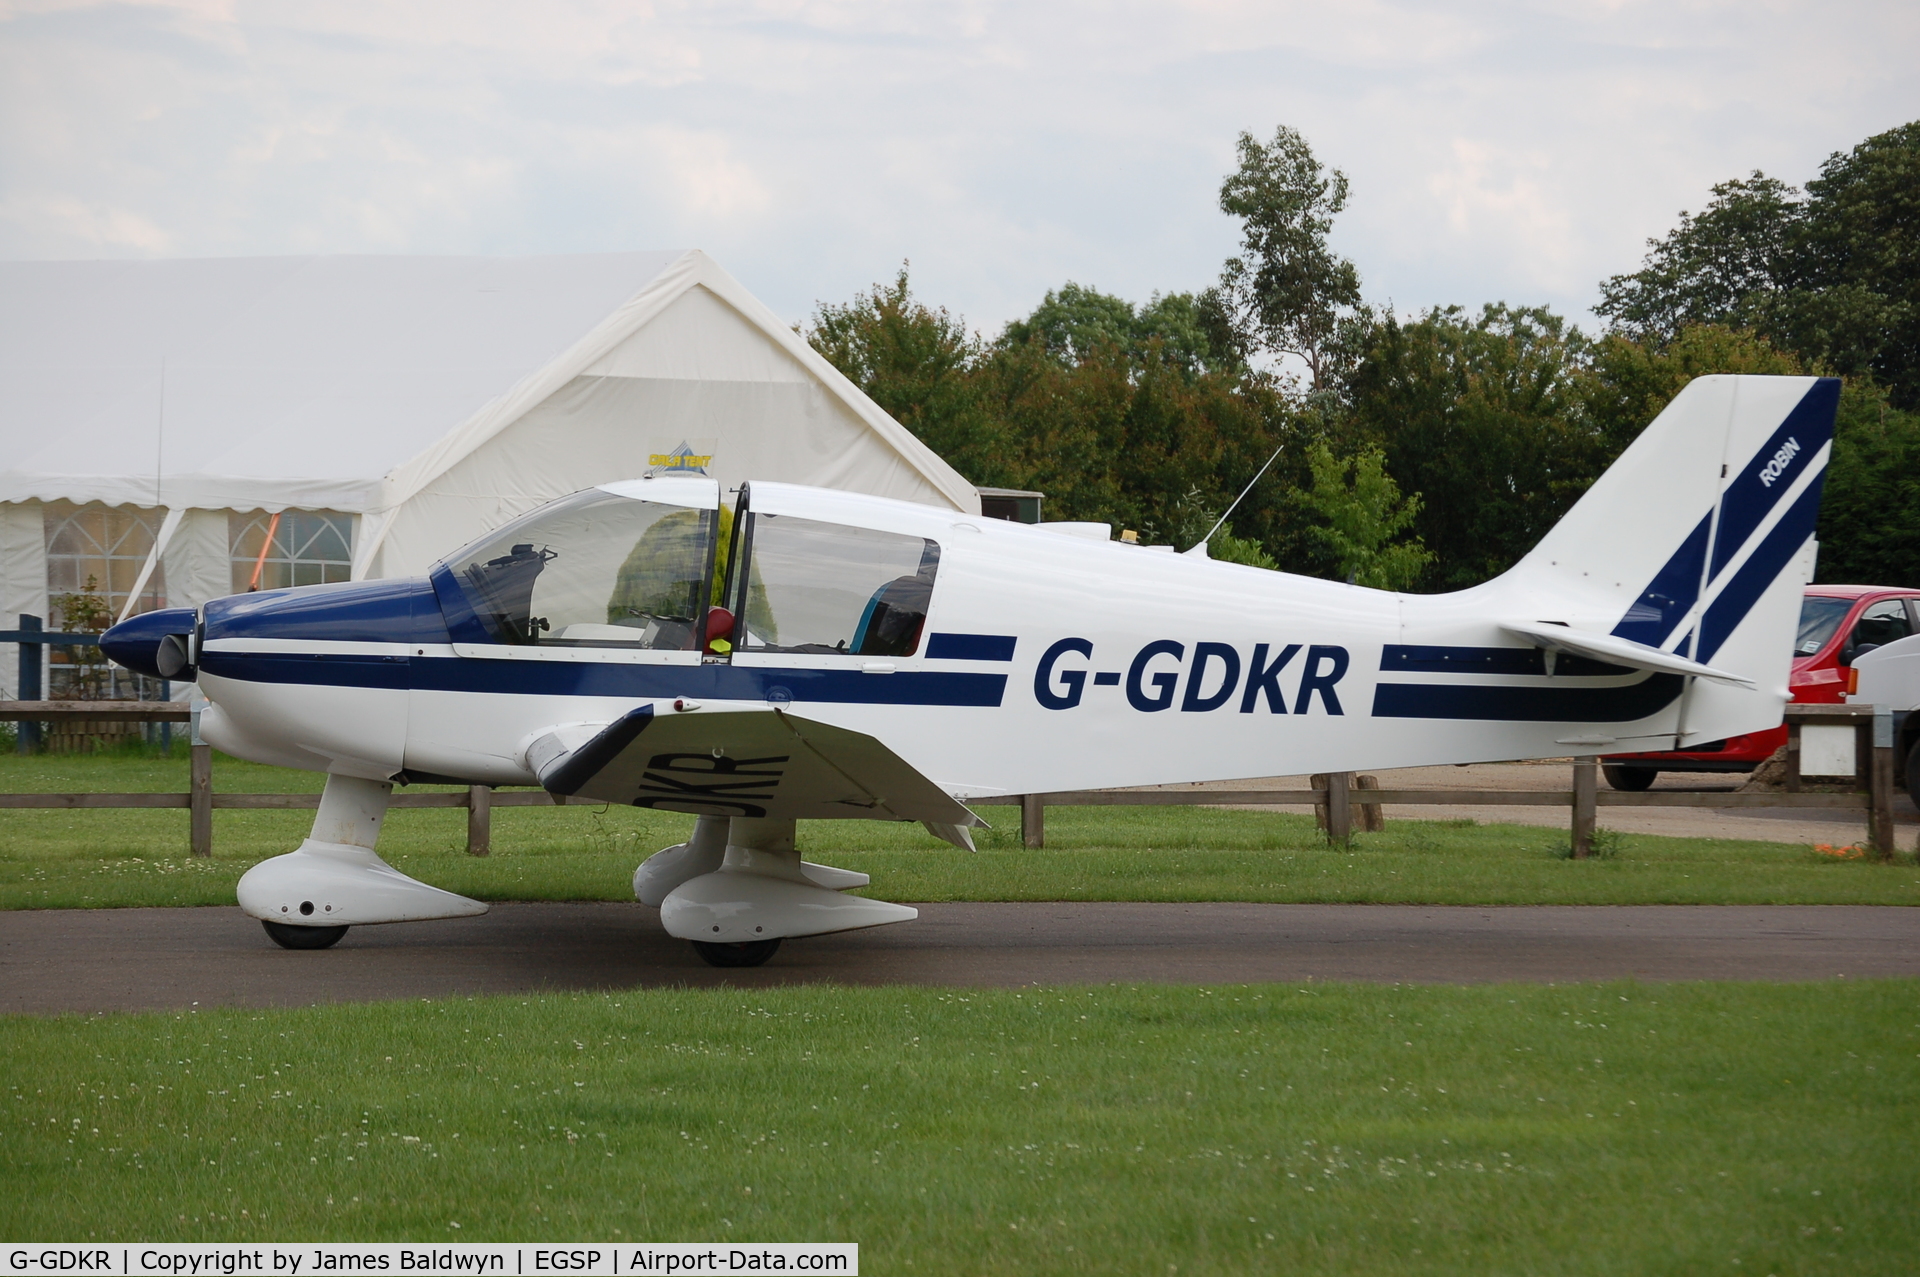 G-GDKR, 1983 Robin DR-400-140B Major C/N 1623, Awating the next pilot to fly her